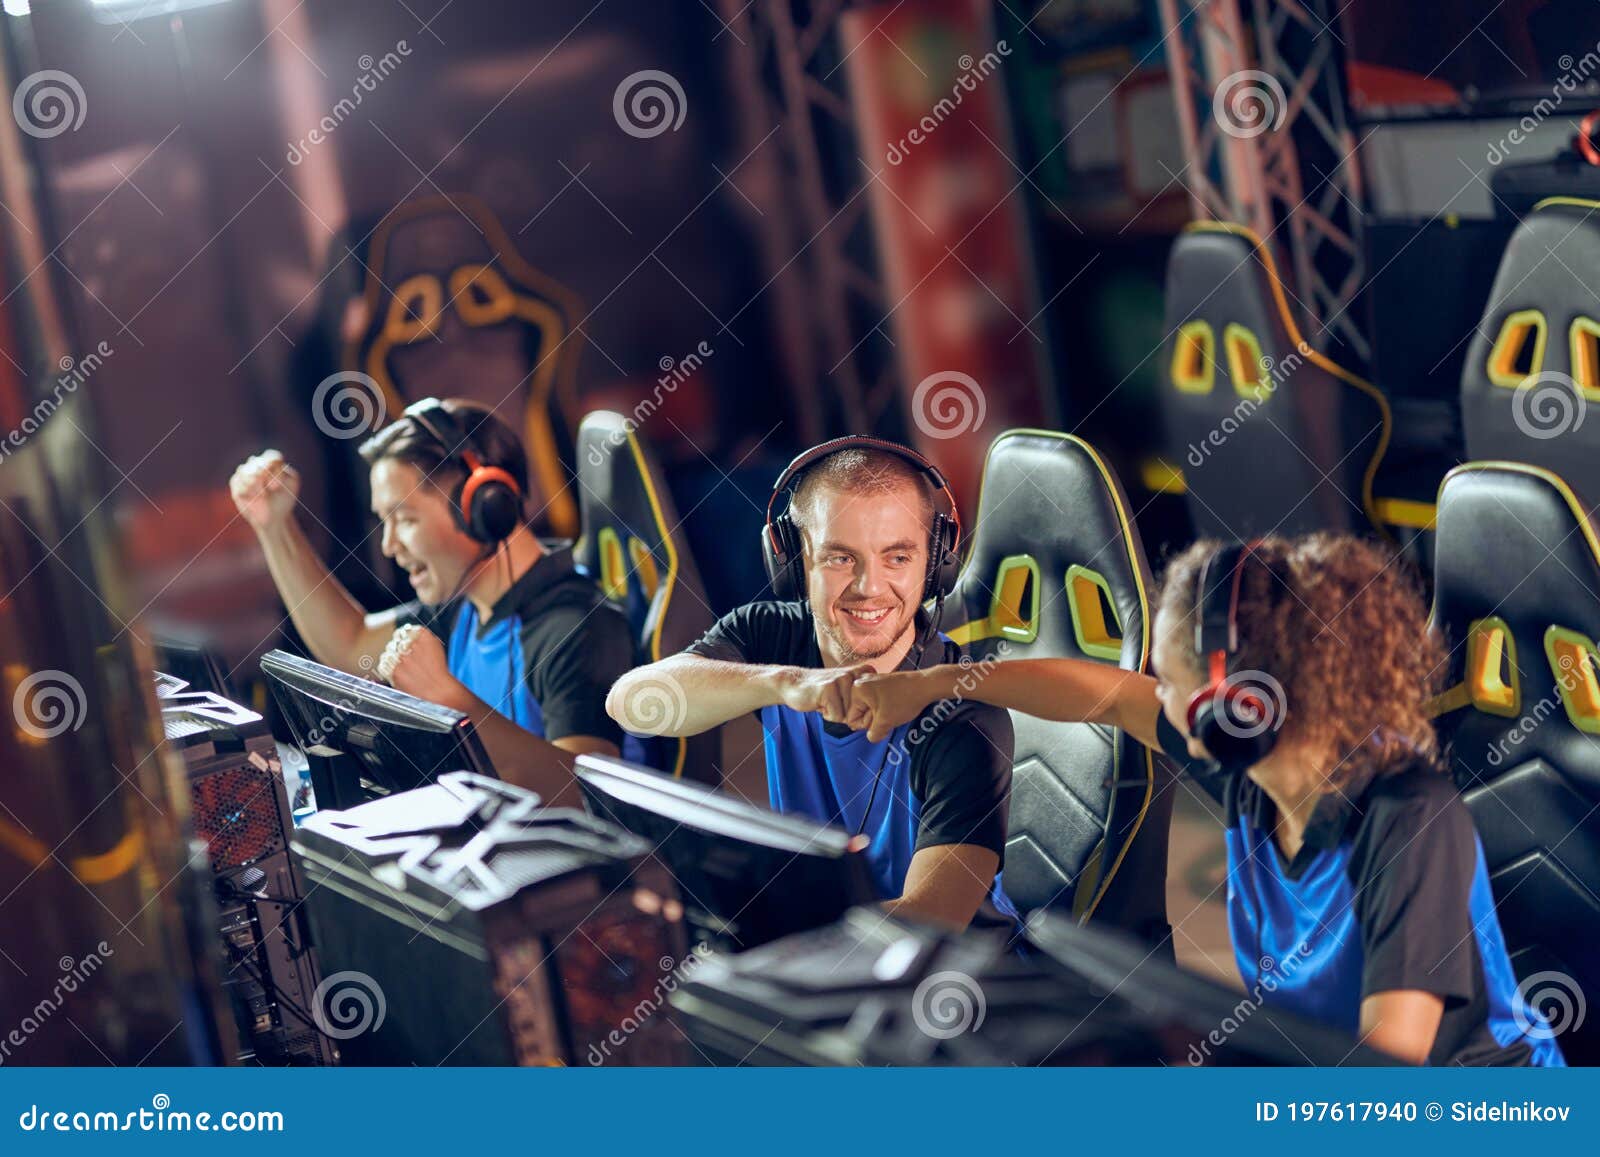 Professional Cyber Sport Gamers Giving Fist Bump and Celebrating Success while Participating in ESports Tournament Stock Photo